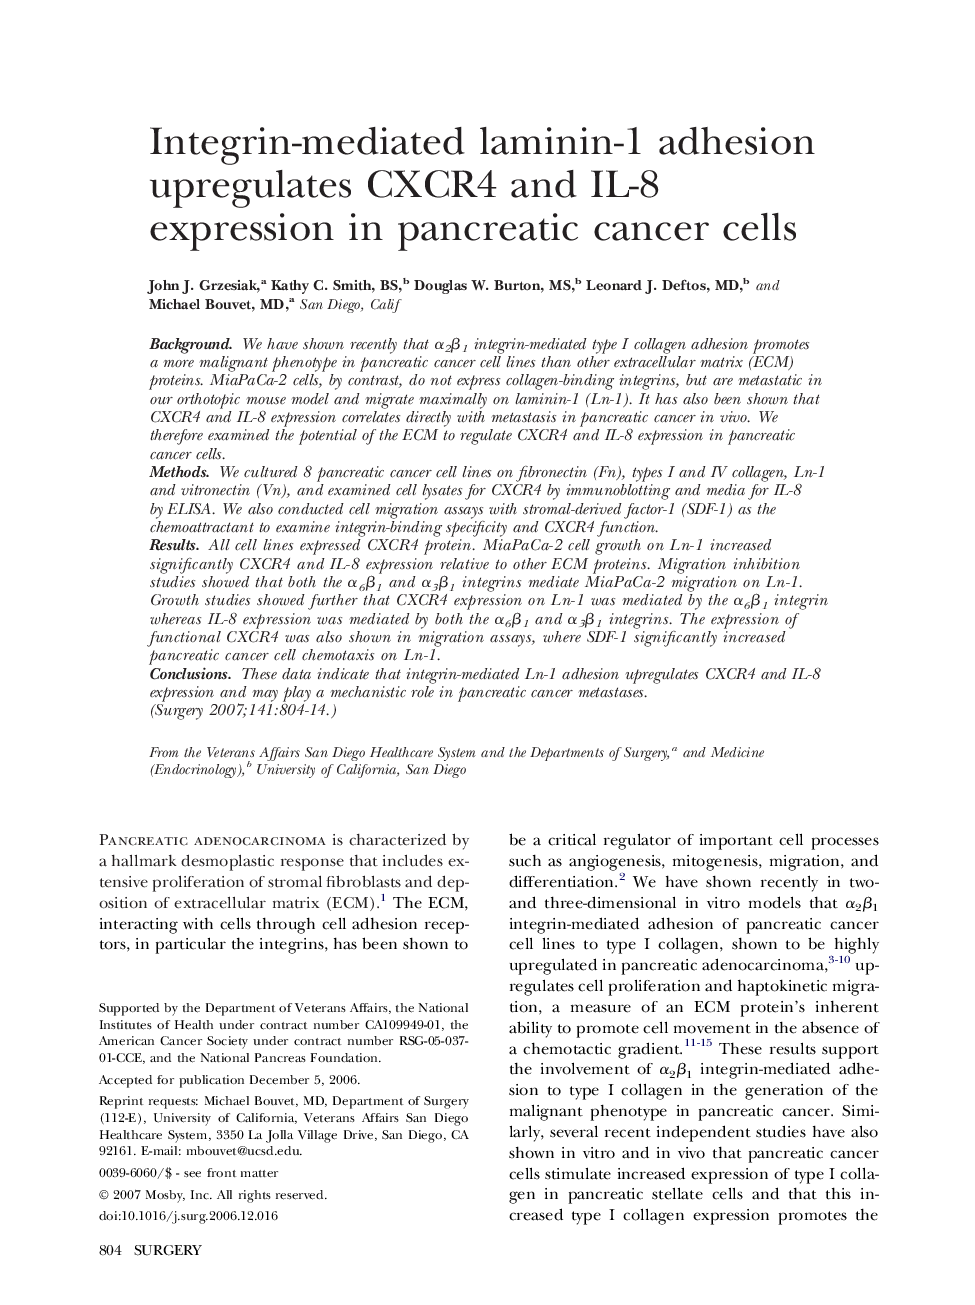 Integrin-mediated laminin-1 adhesion upregulates CXCR4 and IL-8 expression in pancreatic cancer cells 